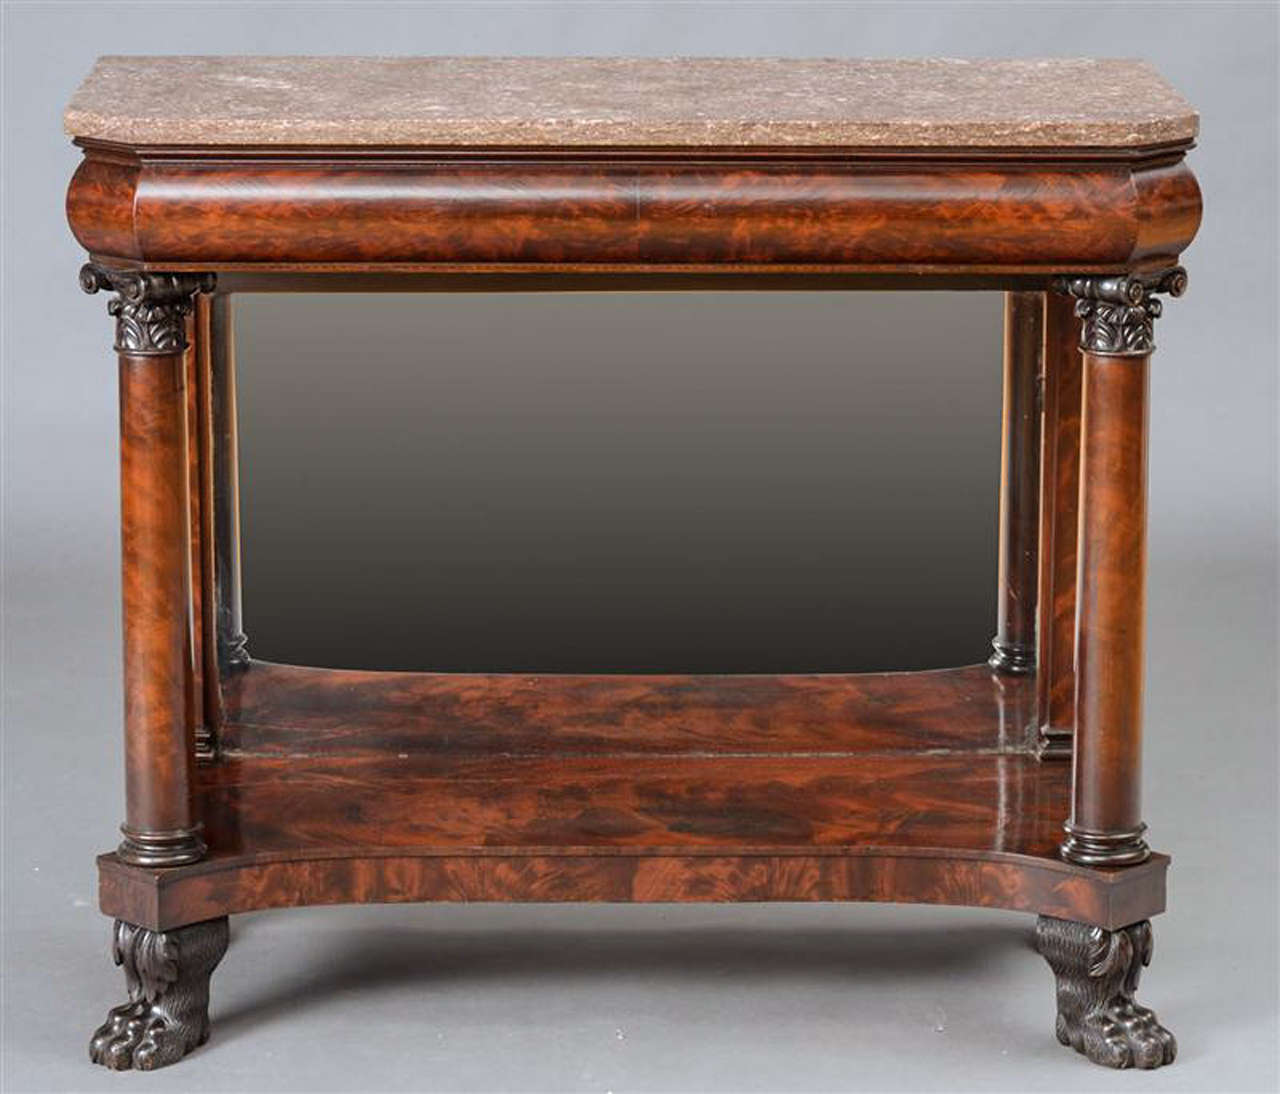 19th Century American Empire Carved Mahogany Pier Table